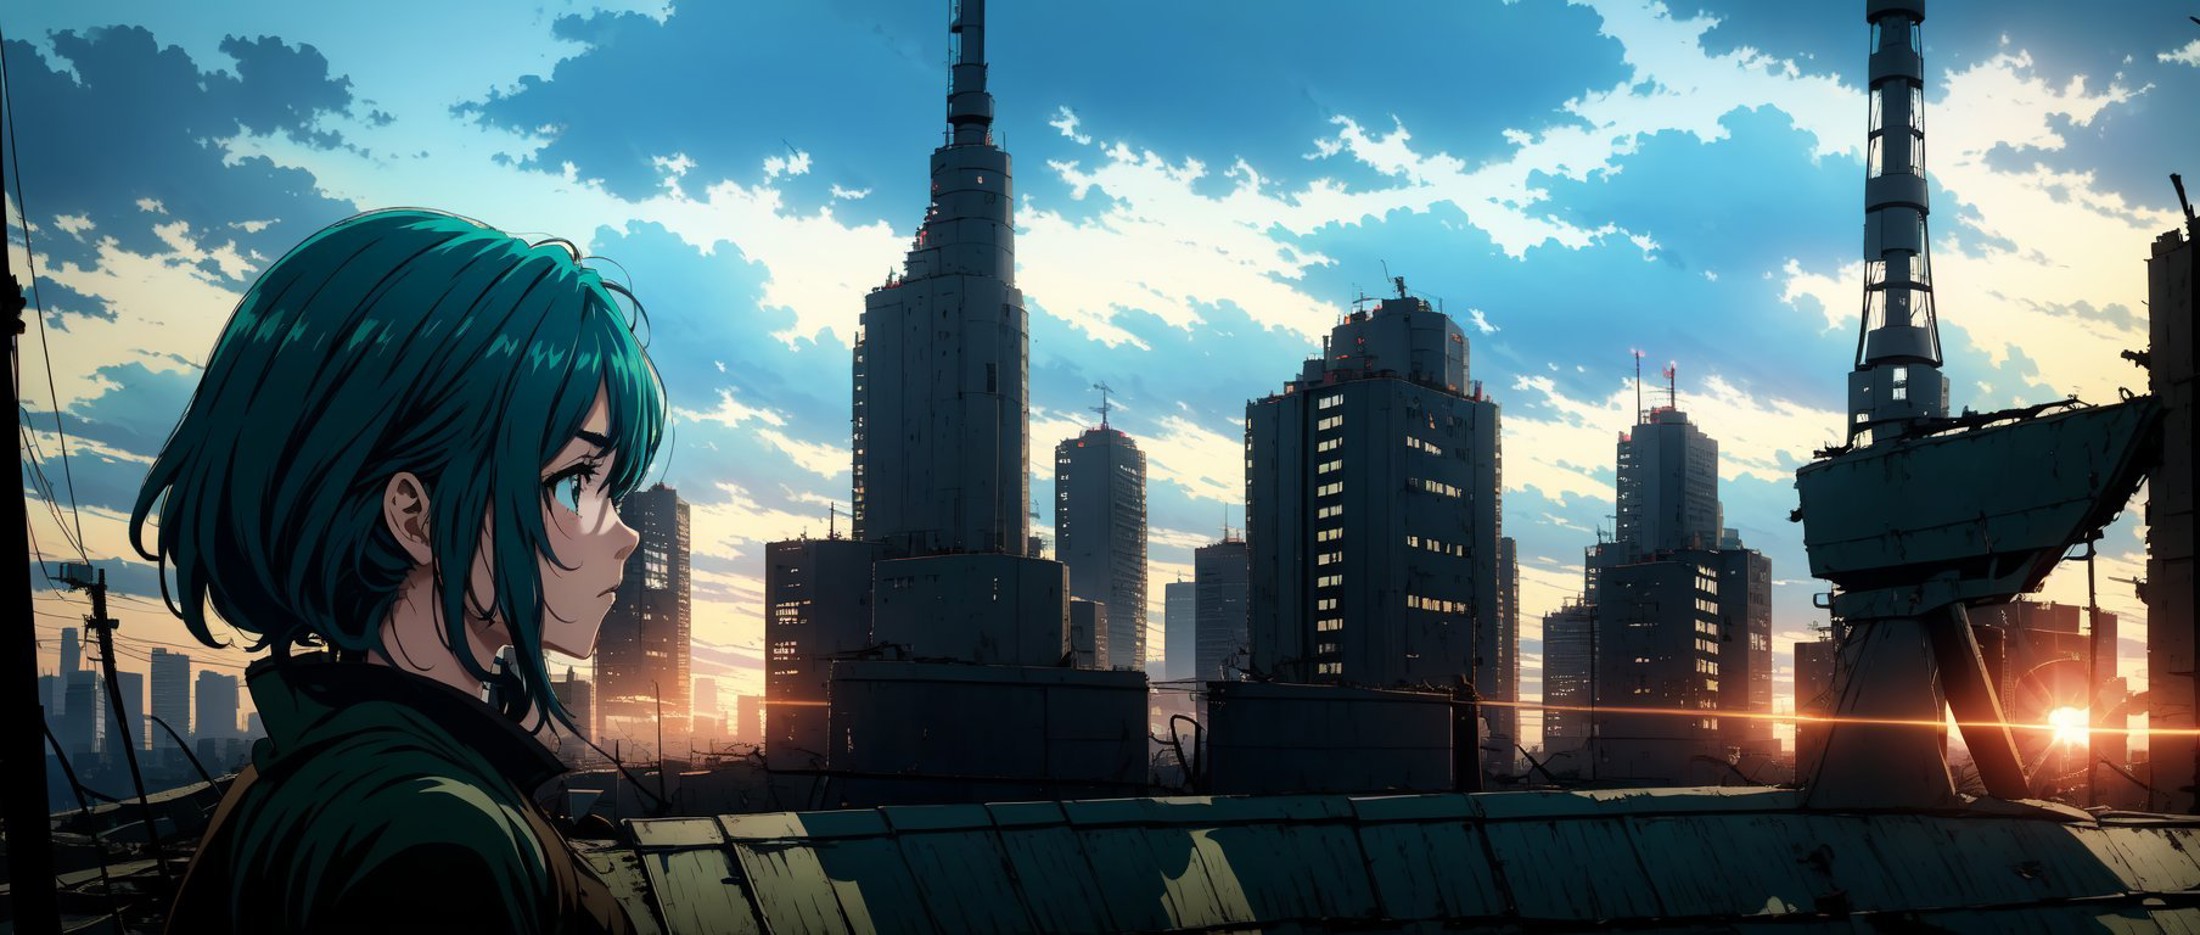 solo anime gorgeous masterpiece portrait post-apocalyptic scene of a woman focus, solo focus, medium long fluffy teal hair...